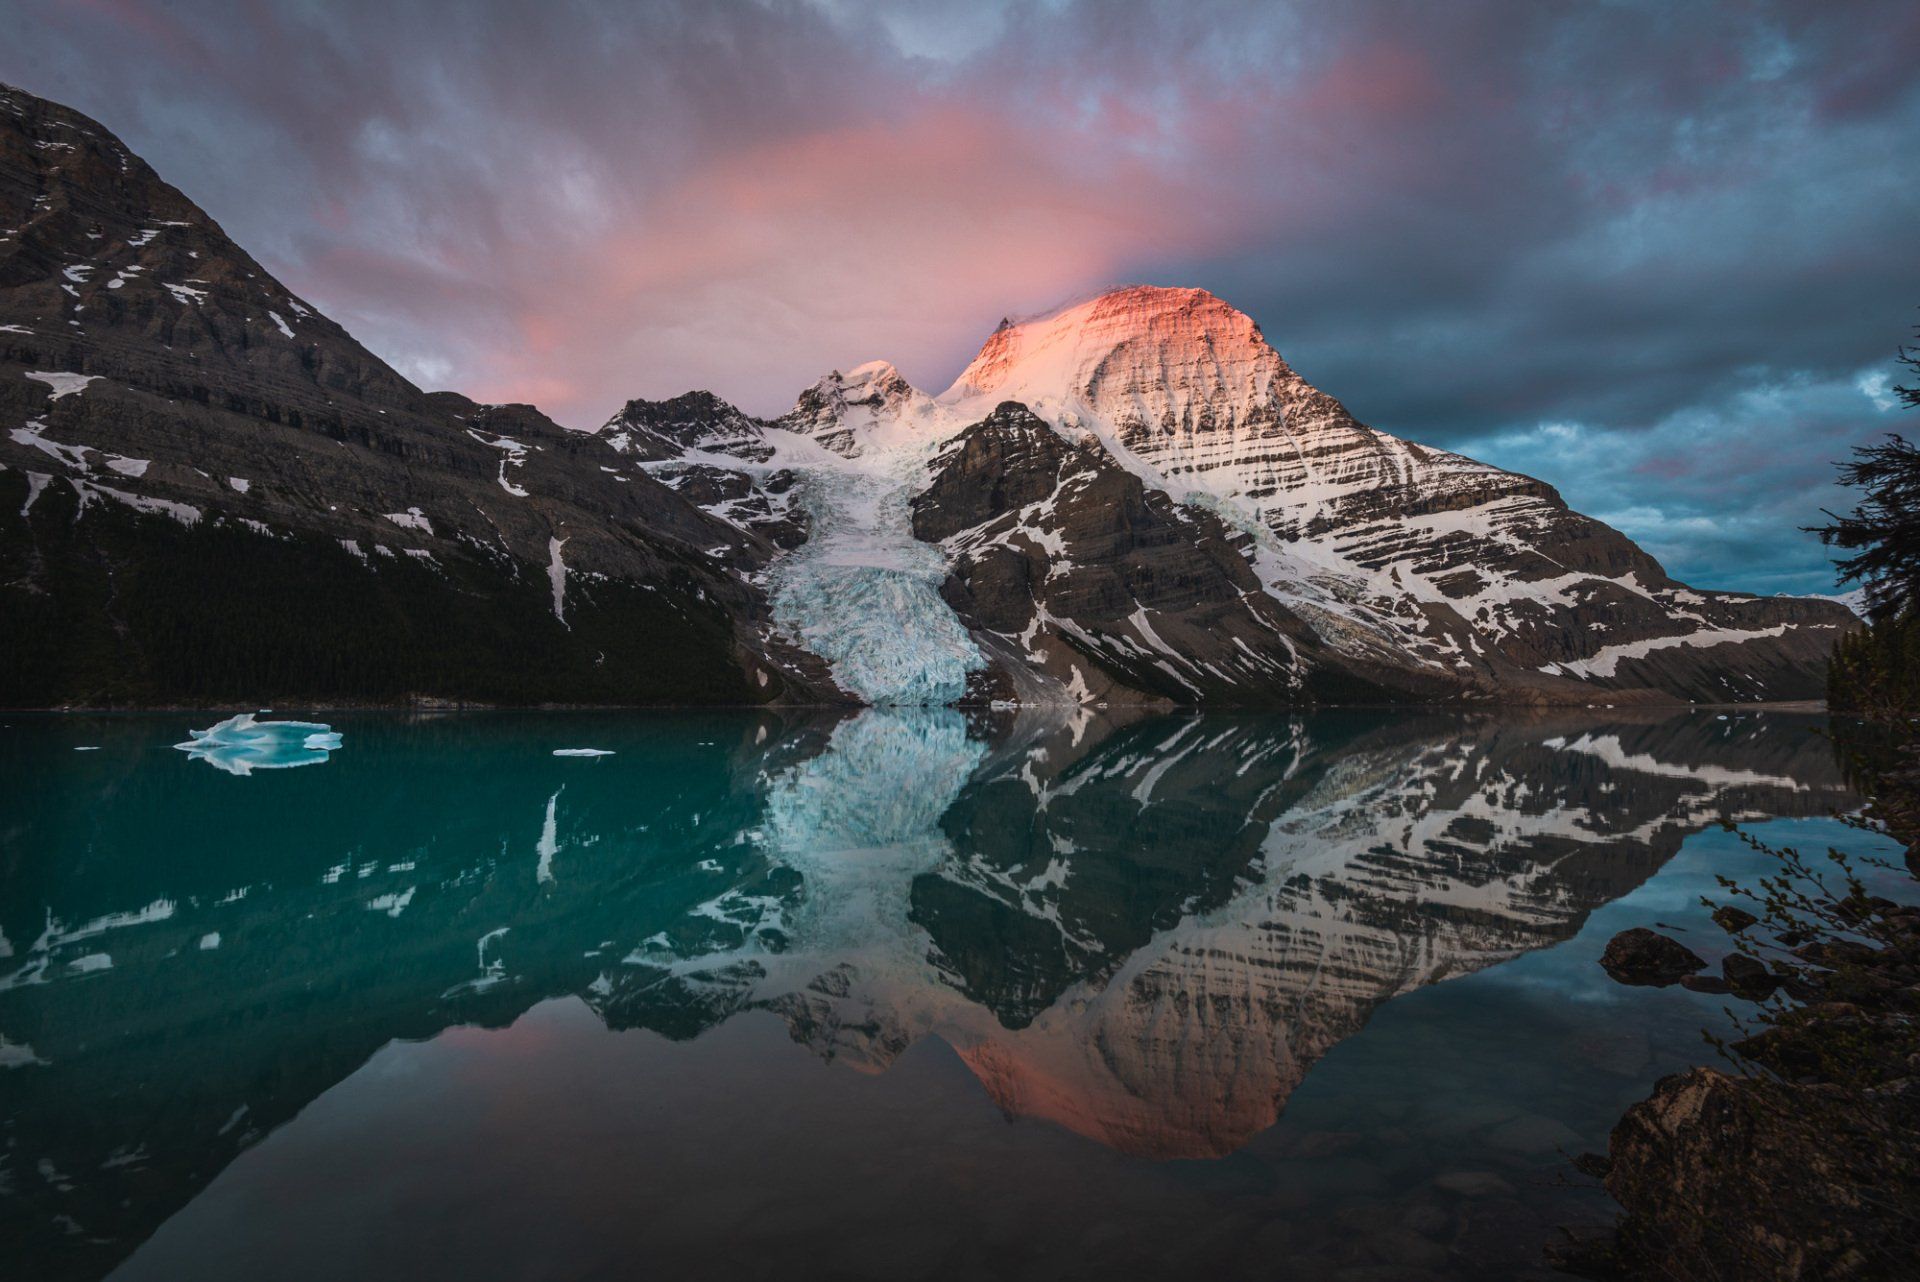 Sunrise on Berg lake, mt Robson park, BC, Canada. Turquoise lake and mountains touched with first rays of morning sun